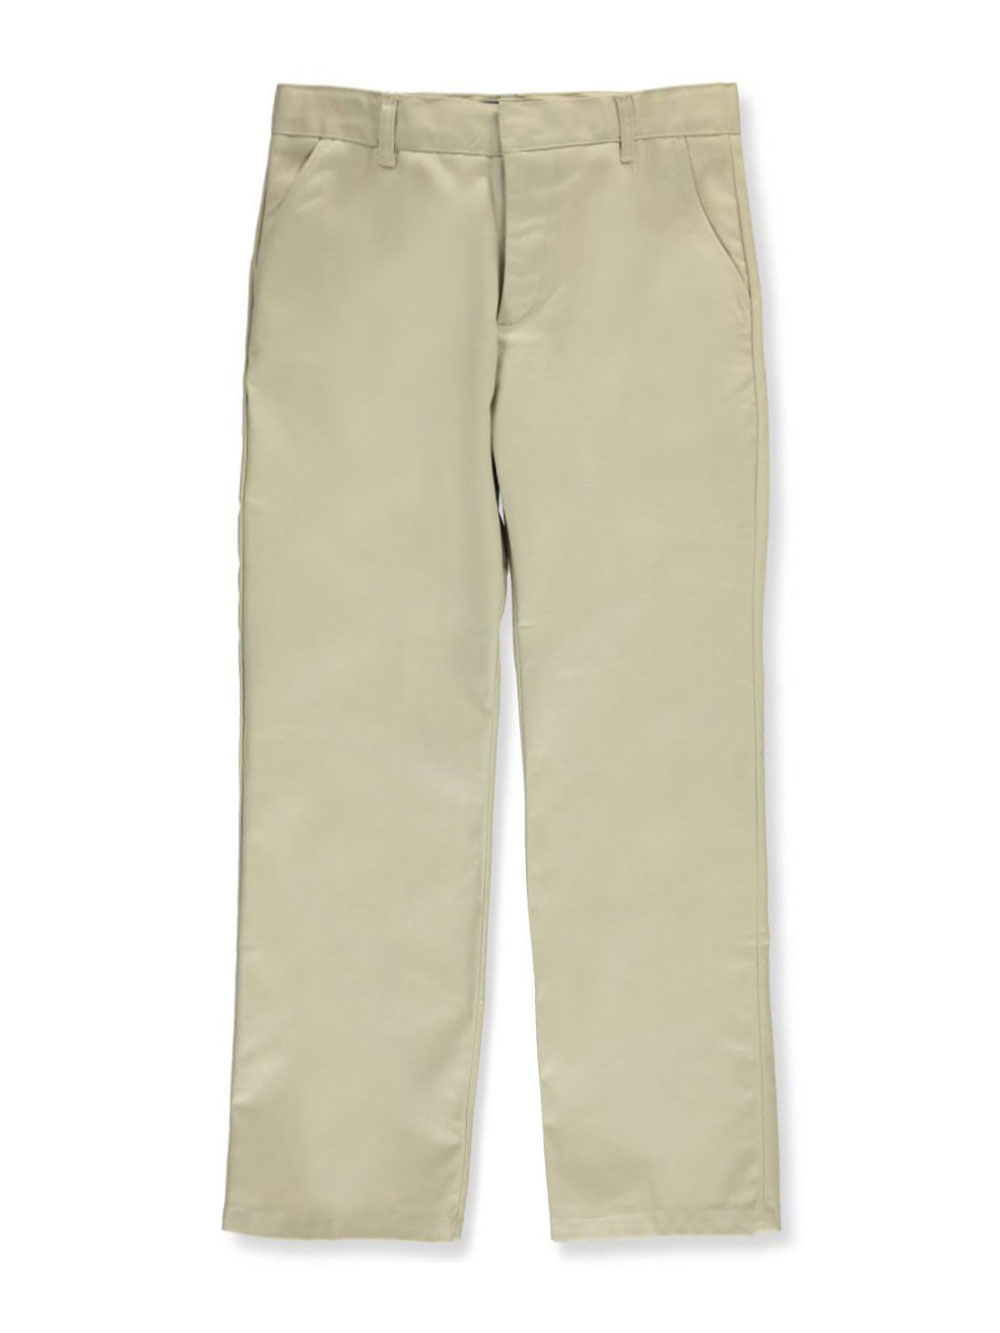 At School by French Toast French Toast Big Boys' Husky Flat Front Wrinkle No More Double Knee Pants (Husky Sizes) - khaki, 16h